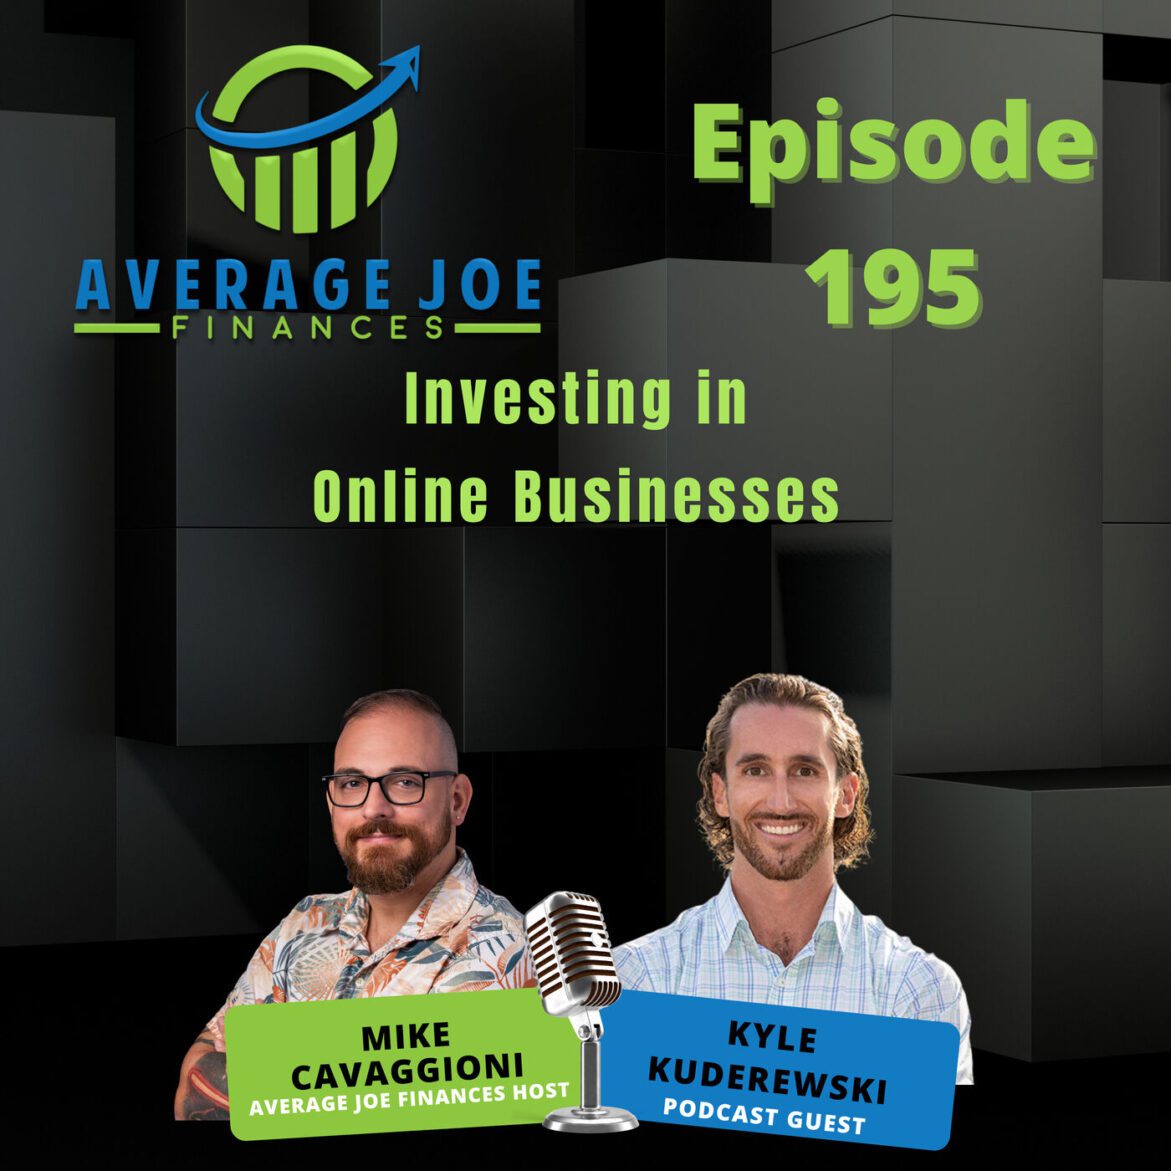 Black Podcasting - 195. Investing in Online Businesses with Kyle Kuderewski